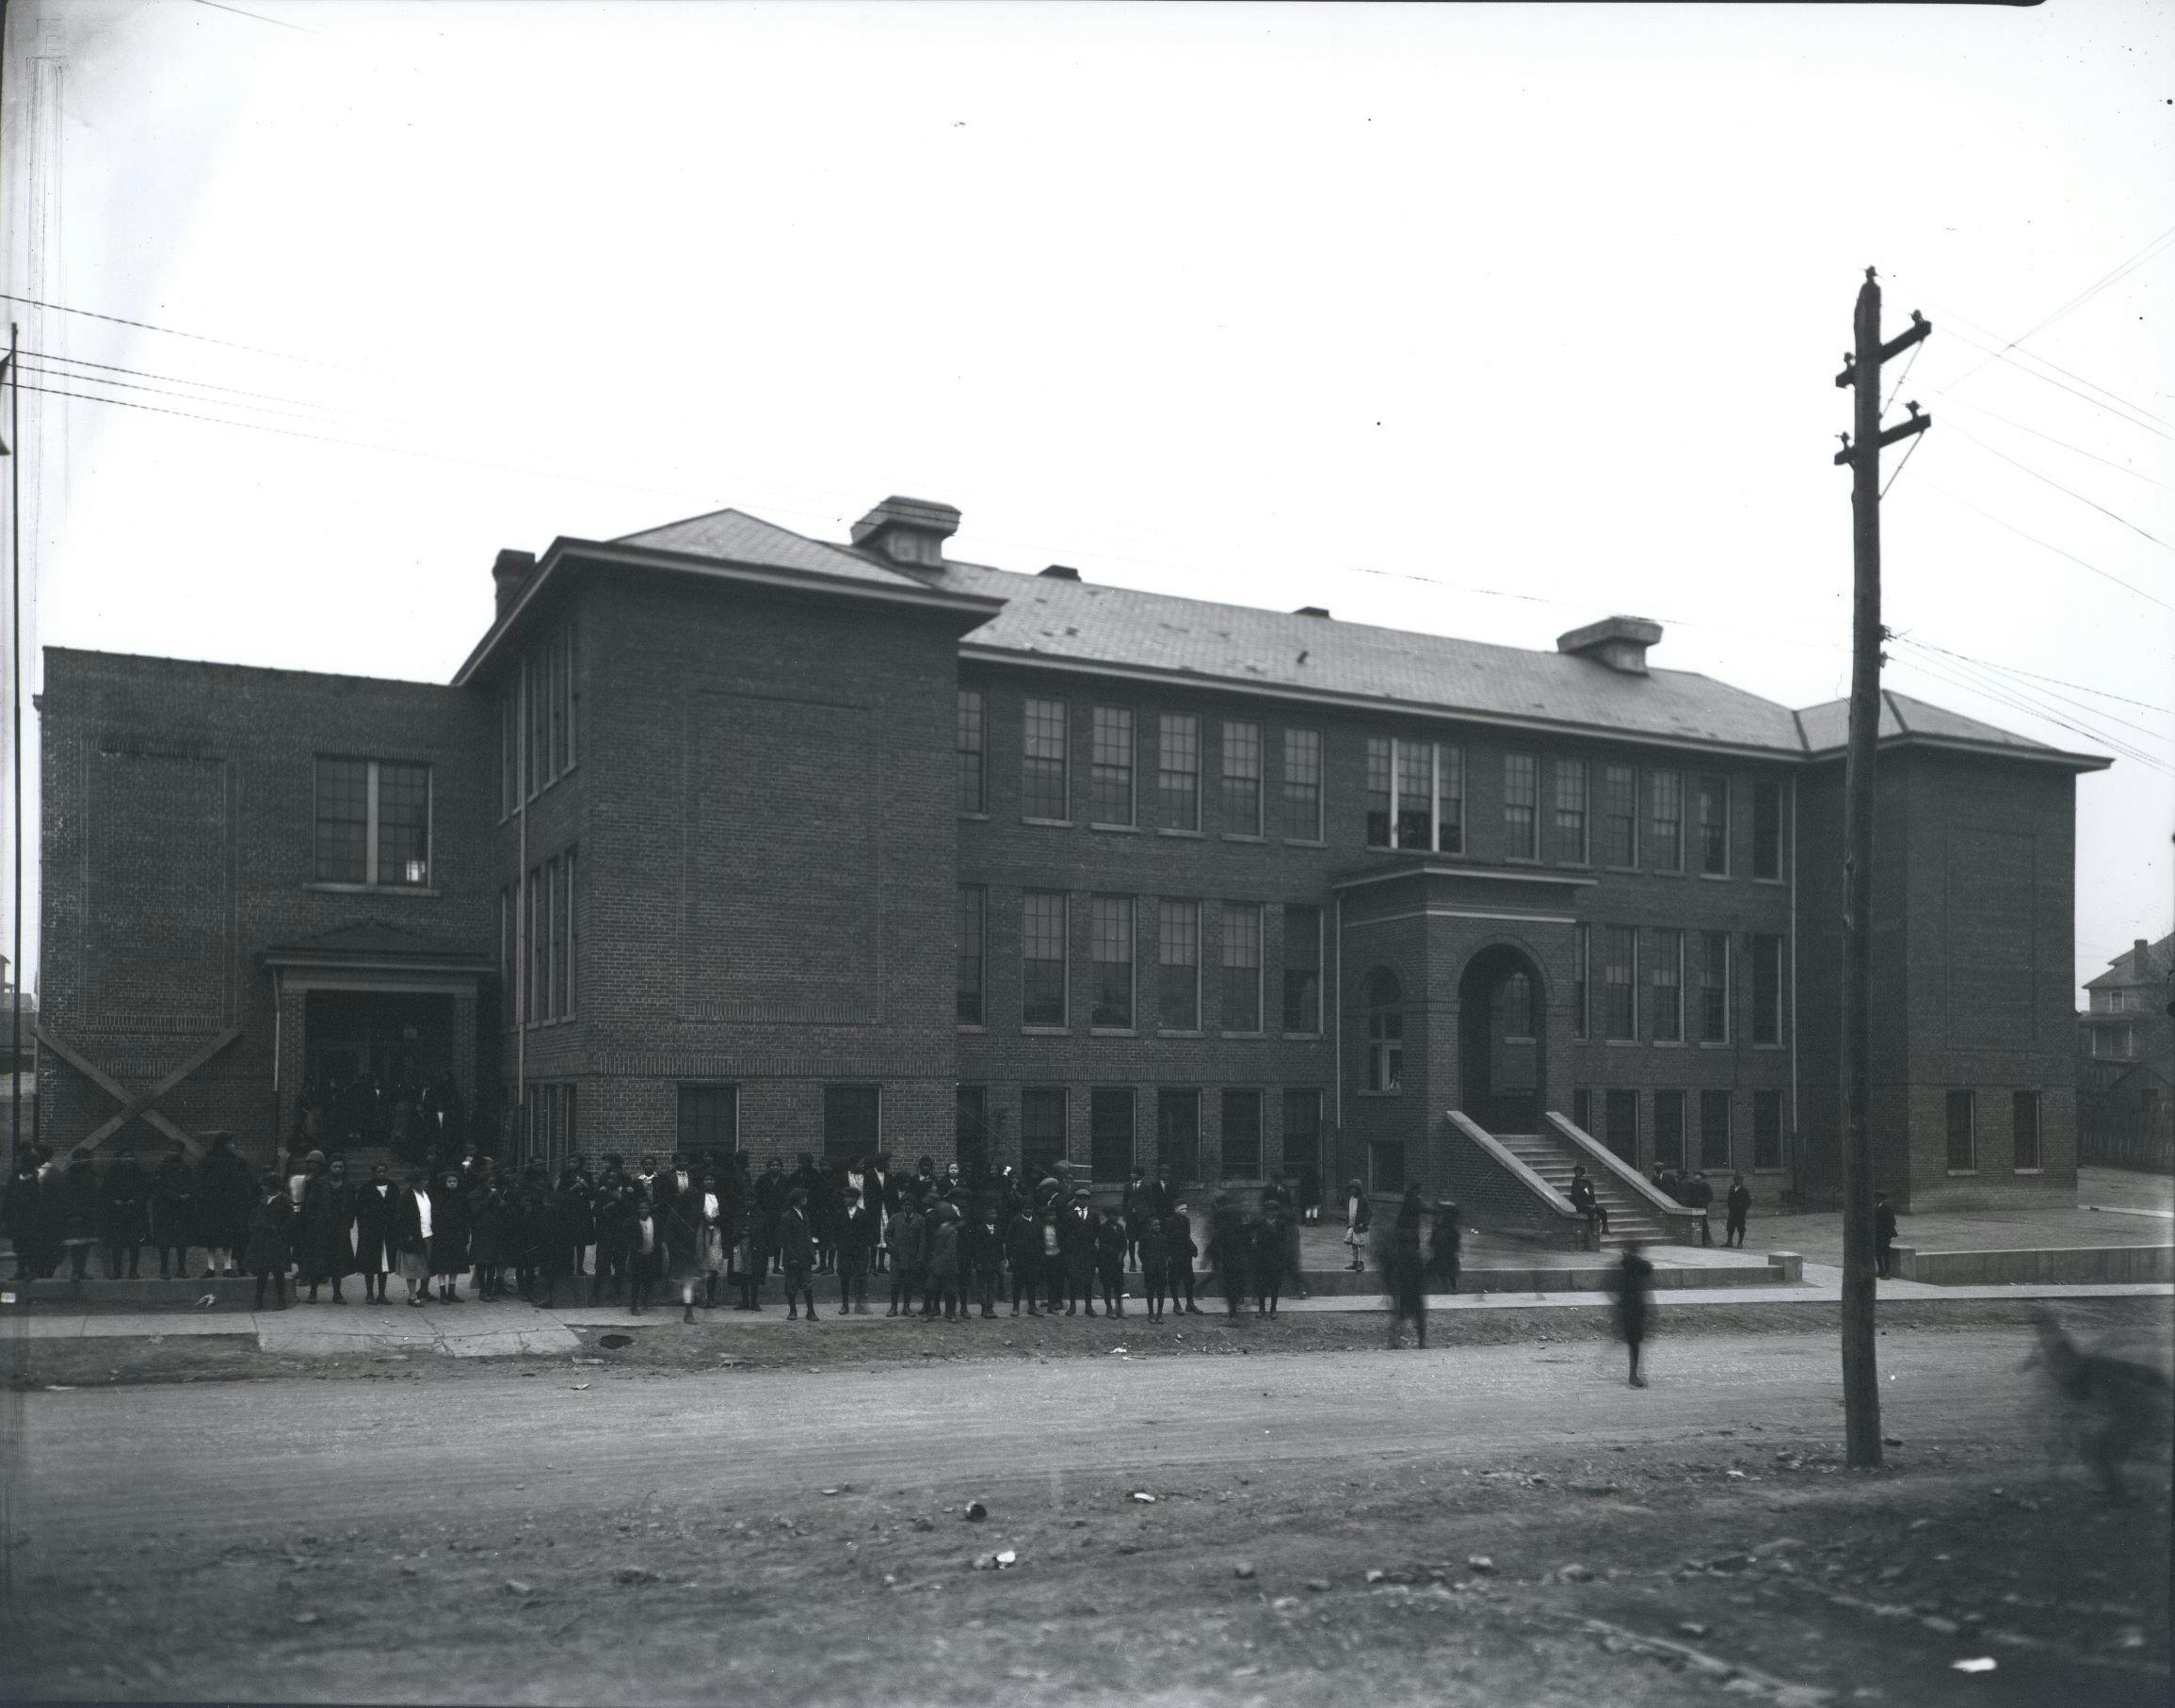 The Harrison school with its large student body out front. The building was 3 main stories tall with a large arched entrance